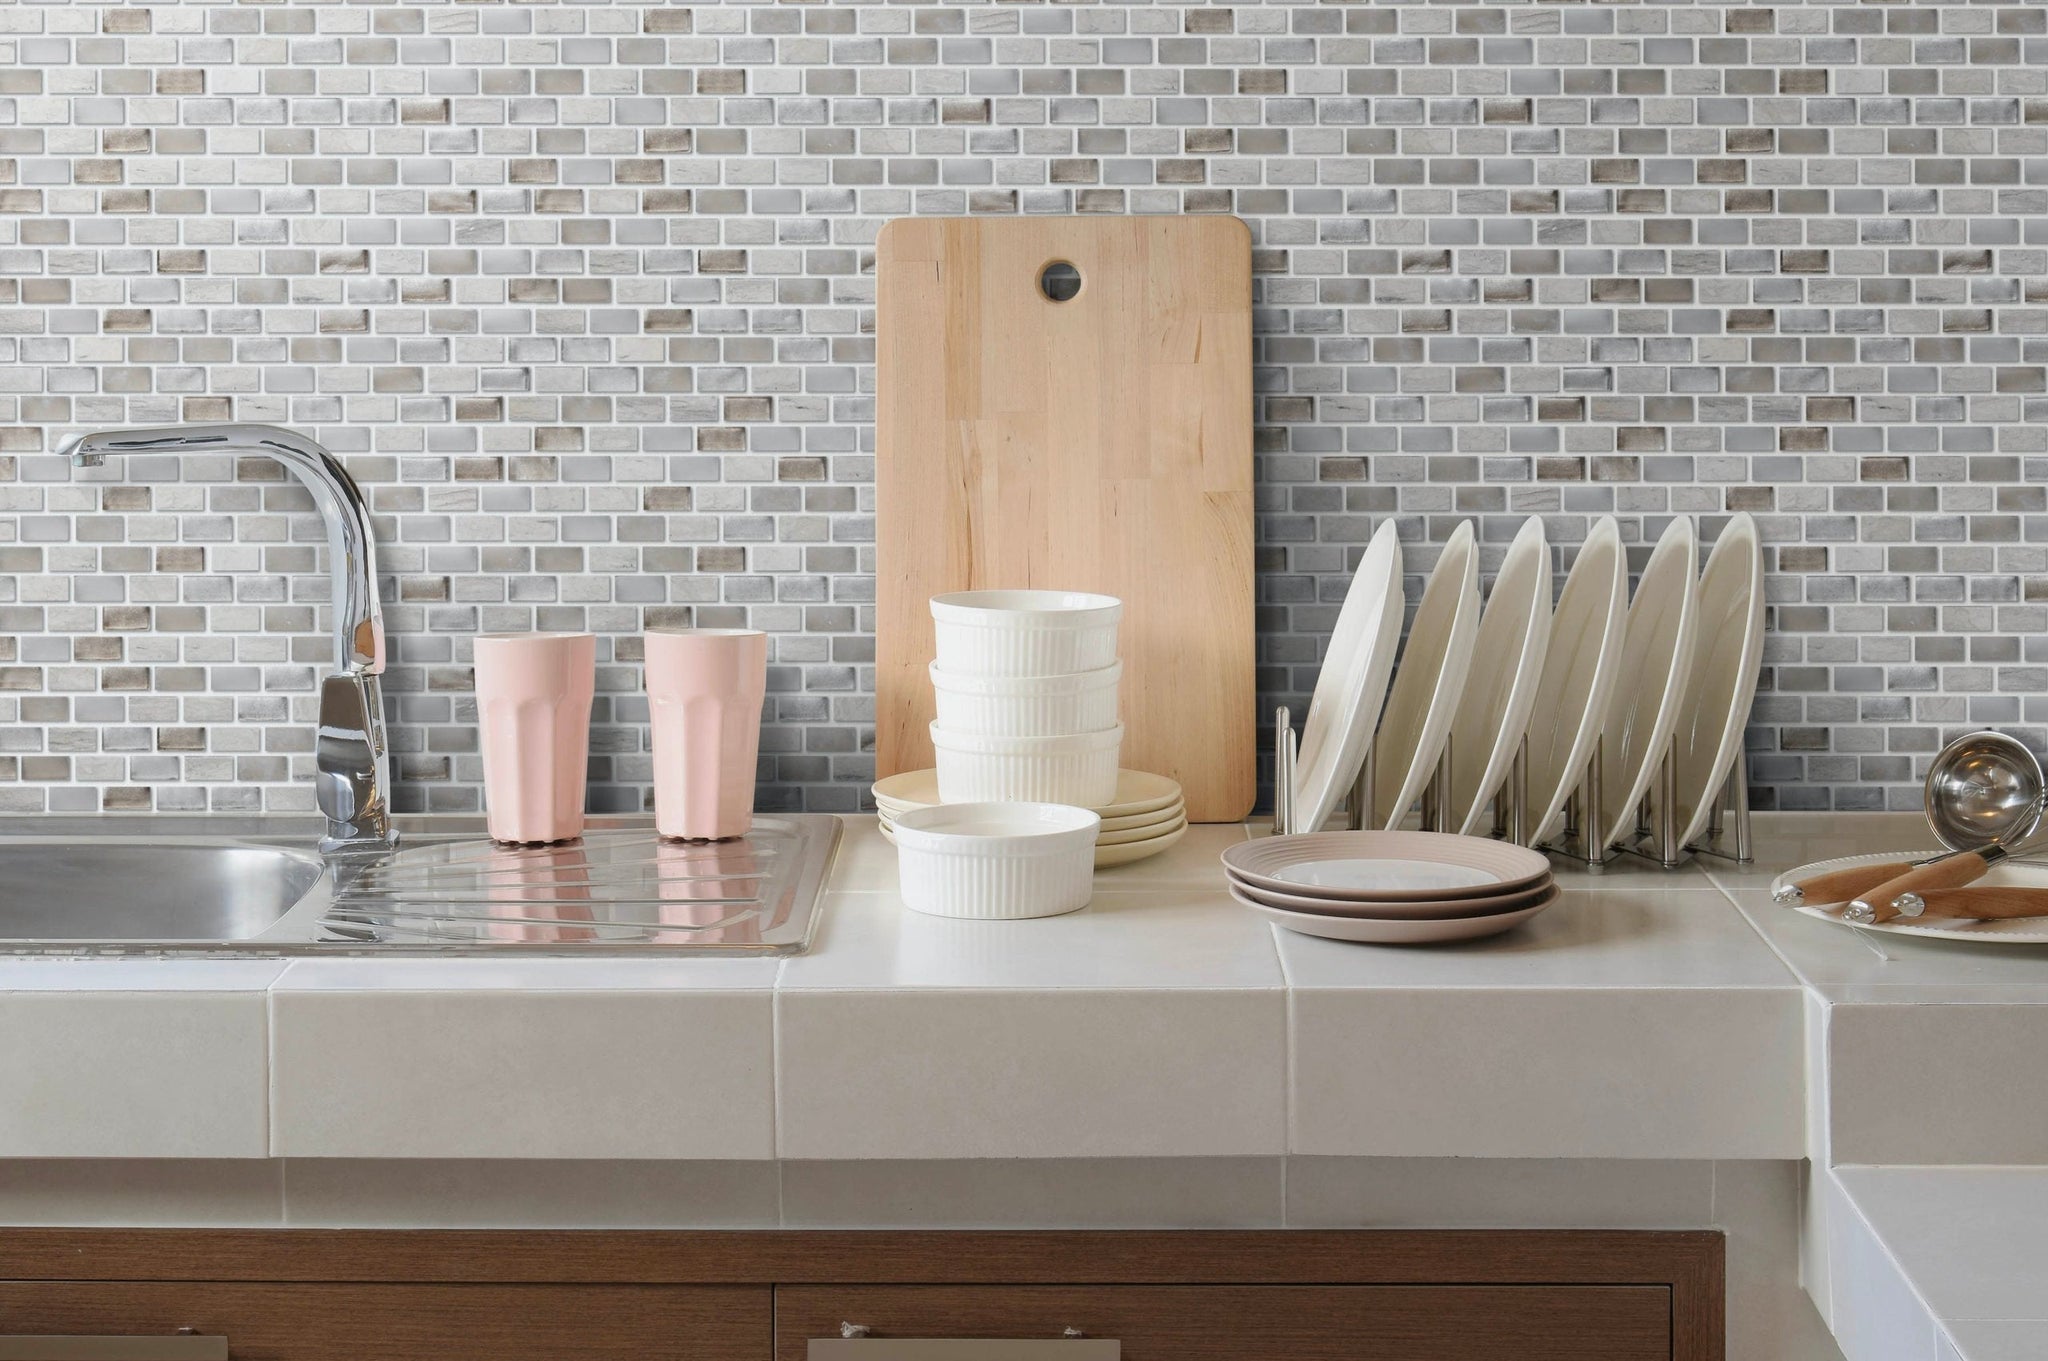 Kitchen Backsplash Tiles That Are a Cinch to Keep Clean